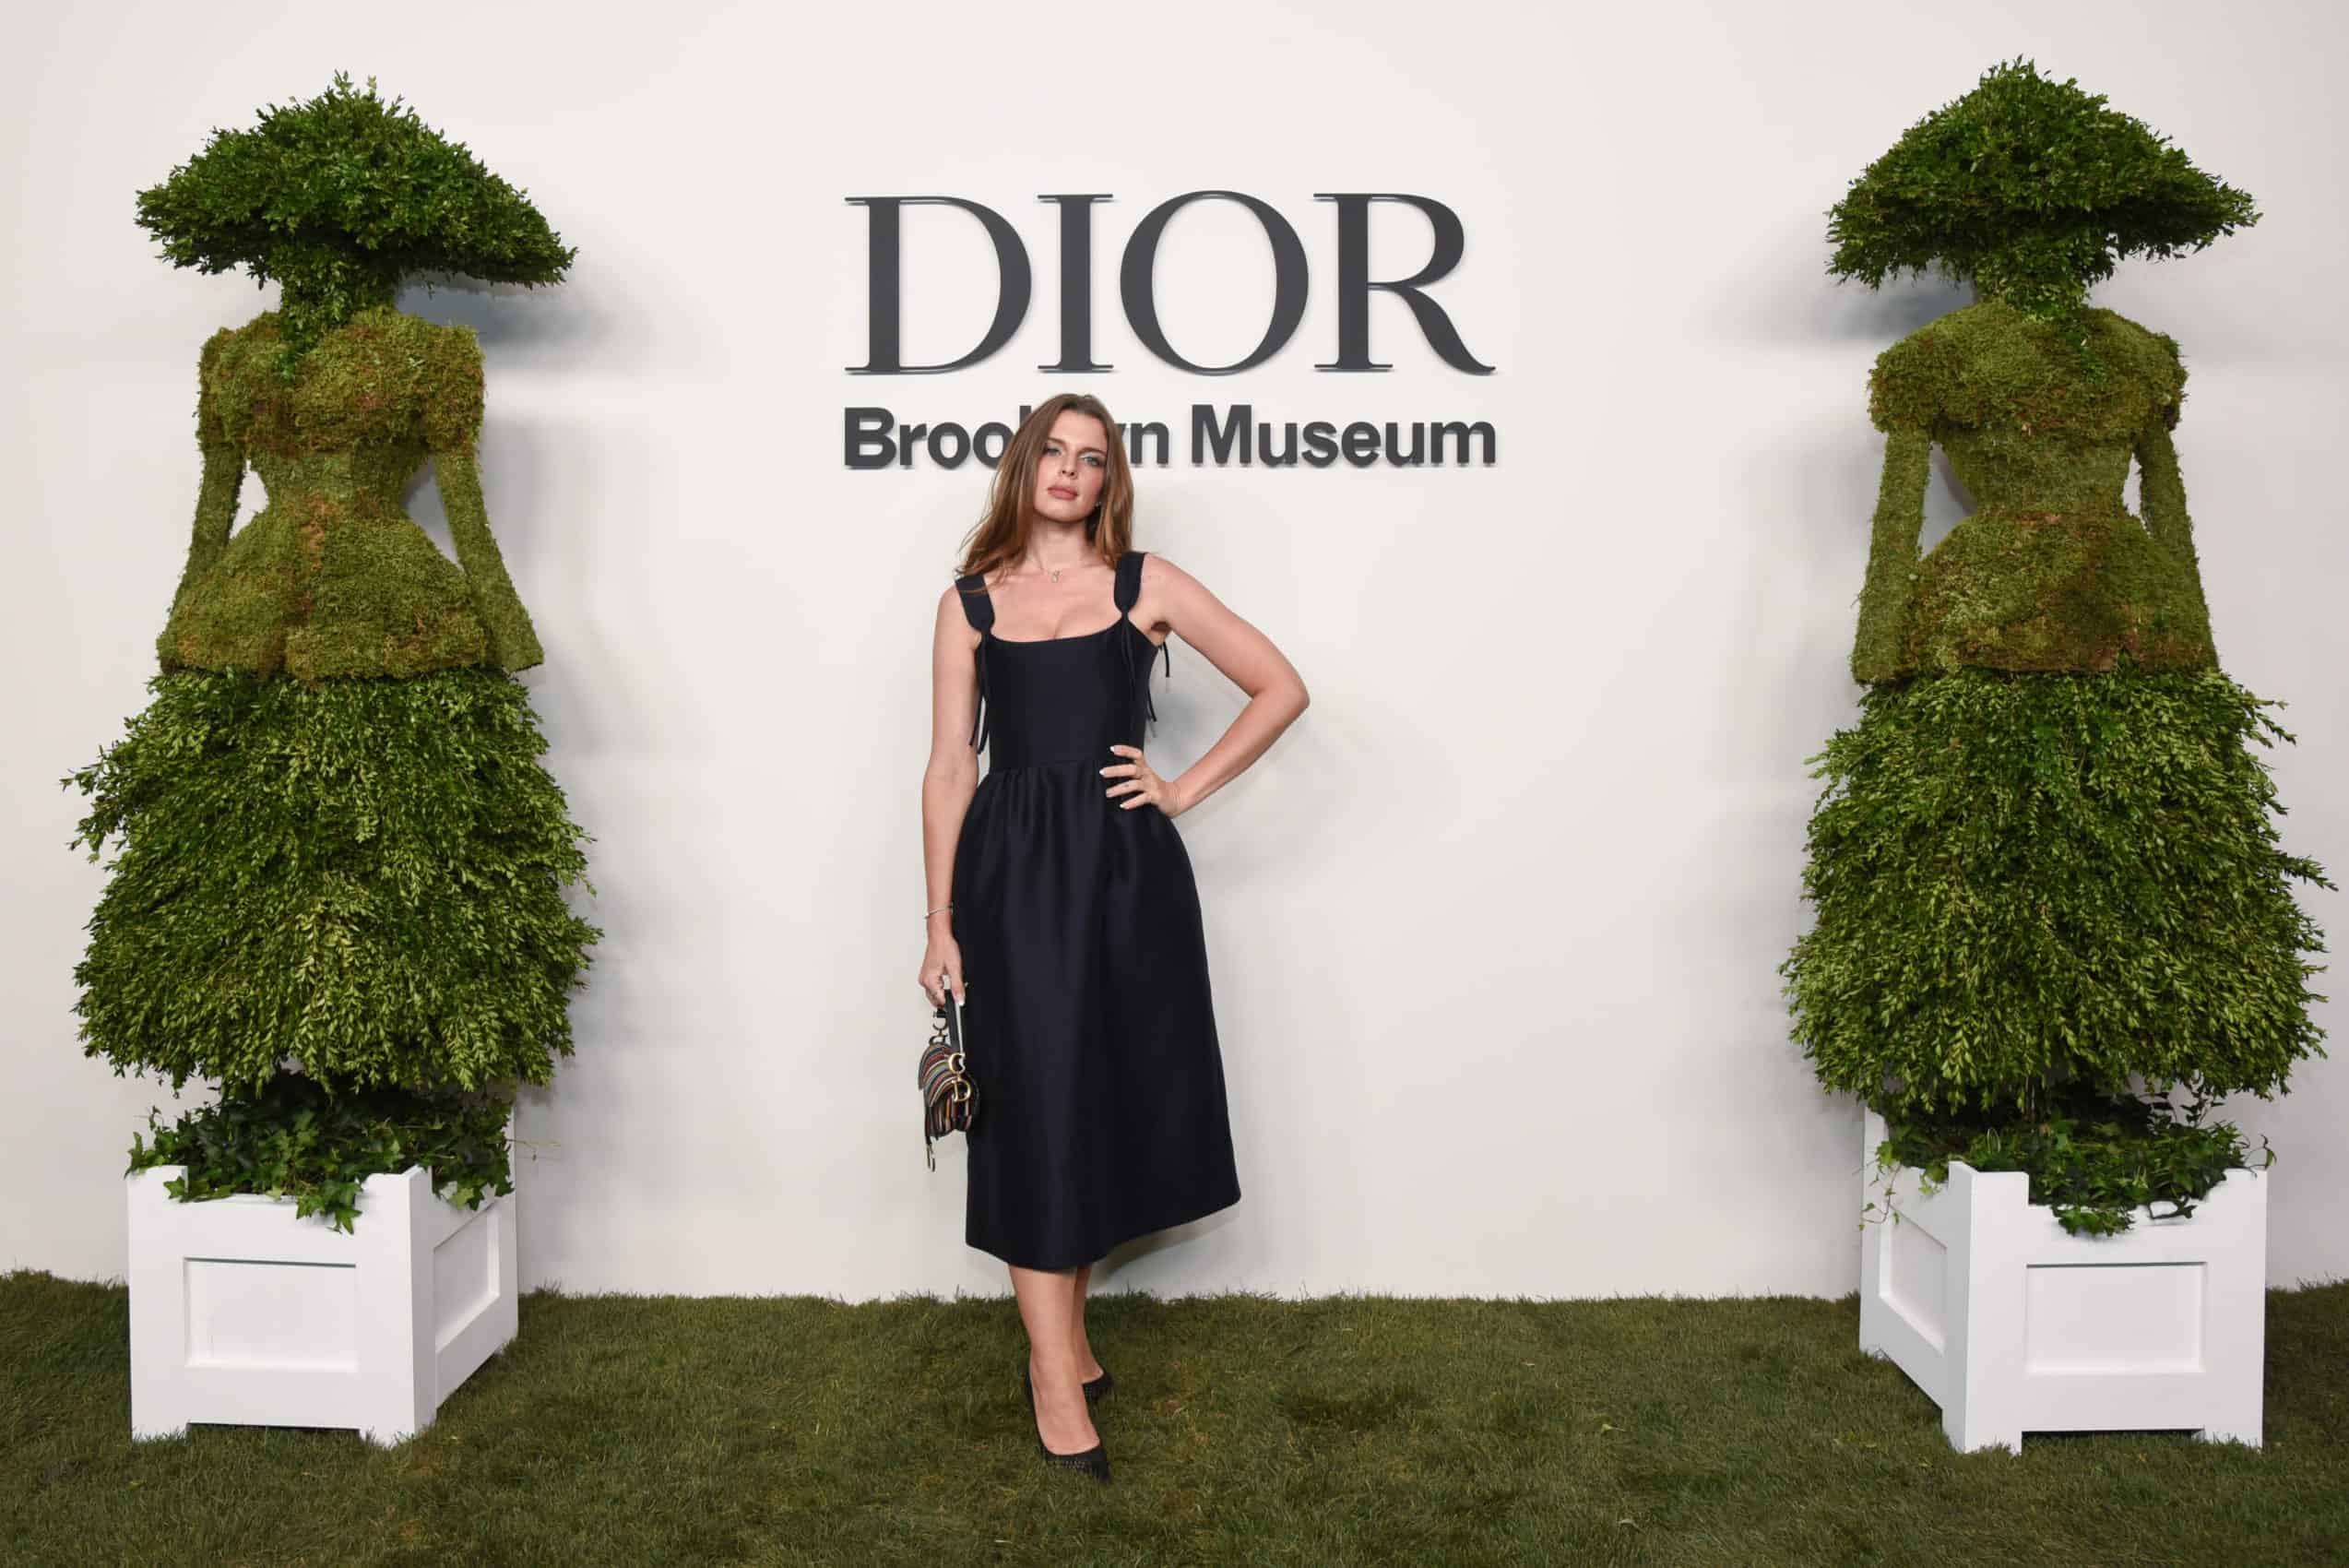 NYFW Parties Are Back! Dior Invites A Listers To Brooklyn Museum Opening,  Bvlgari Goes Big With A Bash At Le Bain, And More! - Daily Front Row